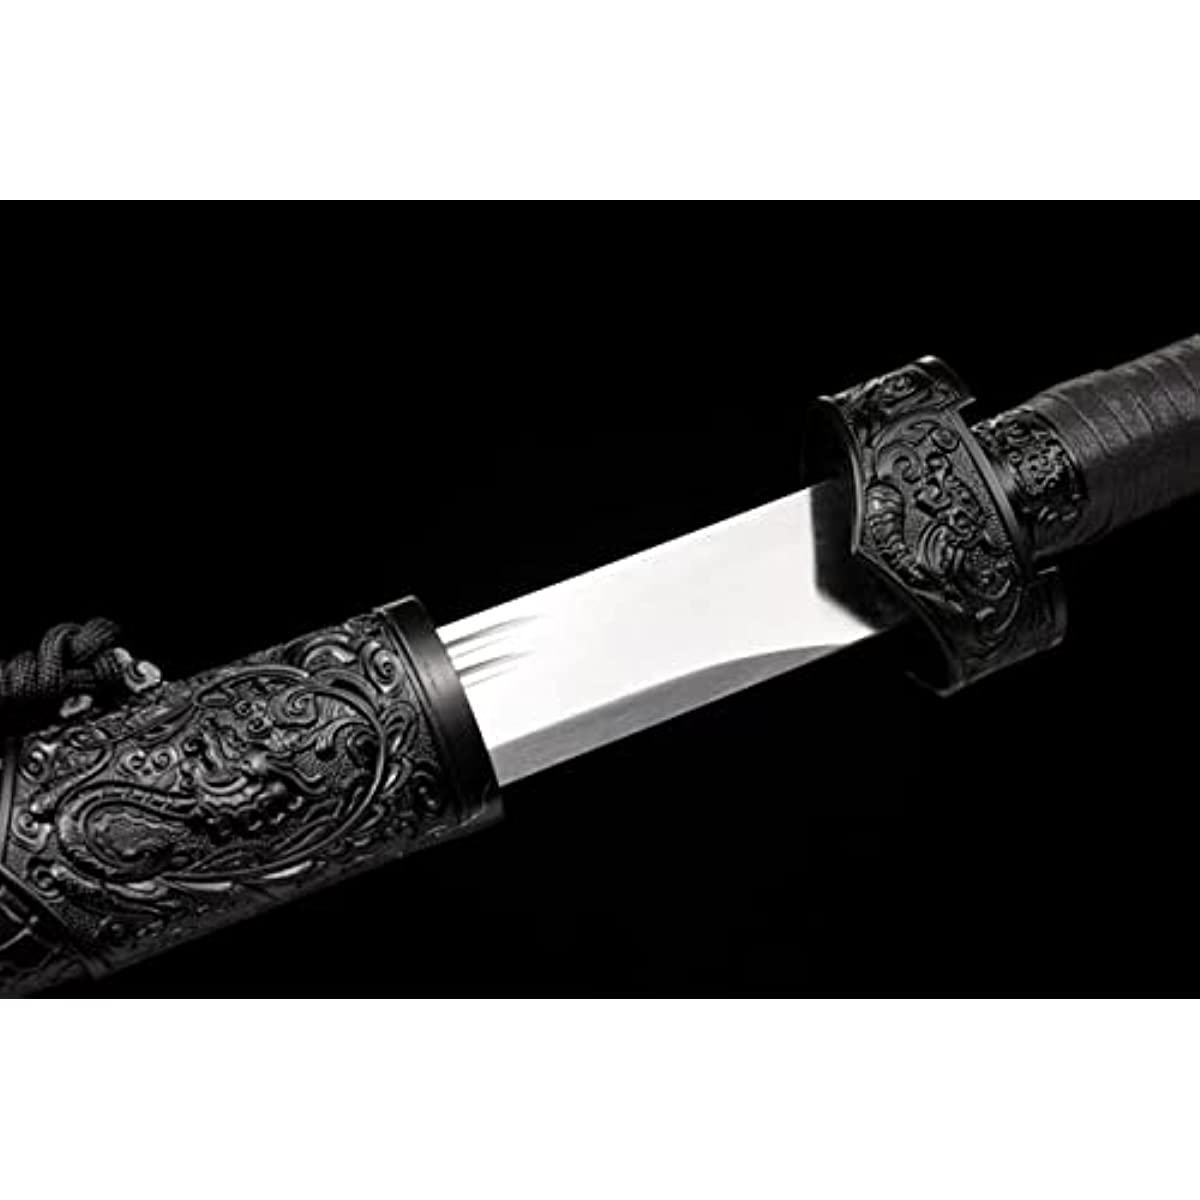 LOONGSWORD,chinese sword,Yanling dao Swords Forged High Carbon Steel Blades,Alloy Fittings